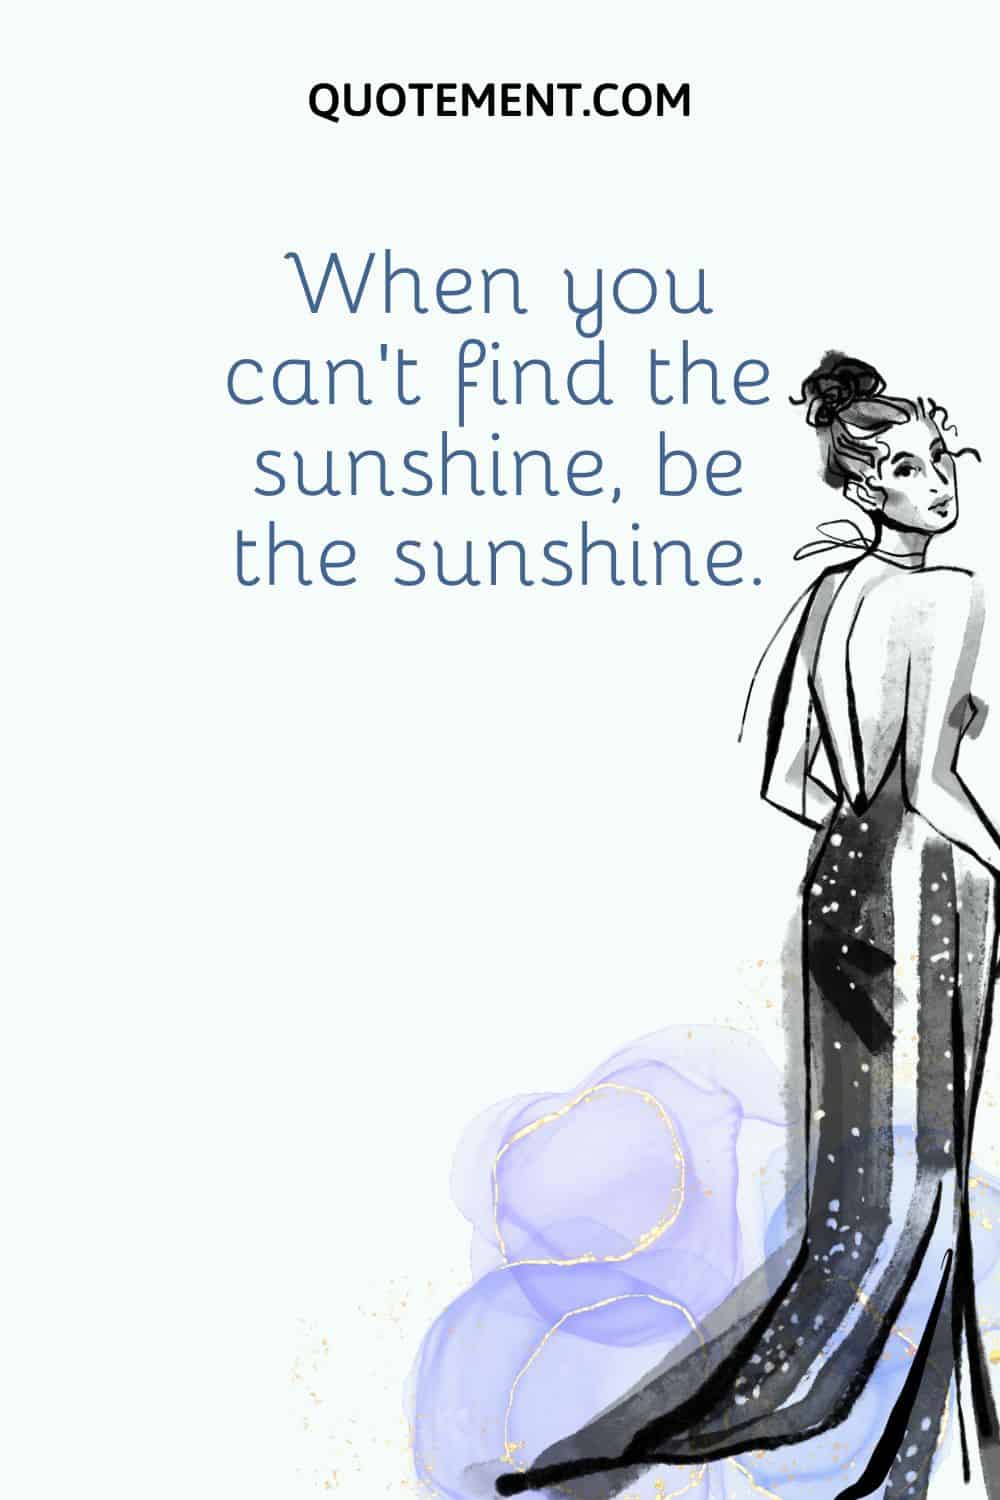 When you can’t find the sunshine, be the sunshine